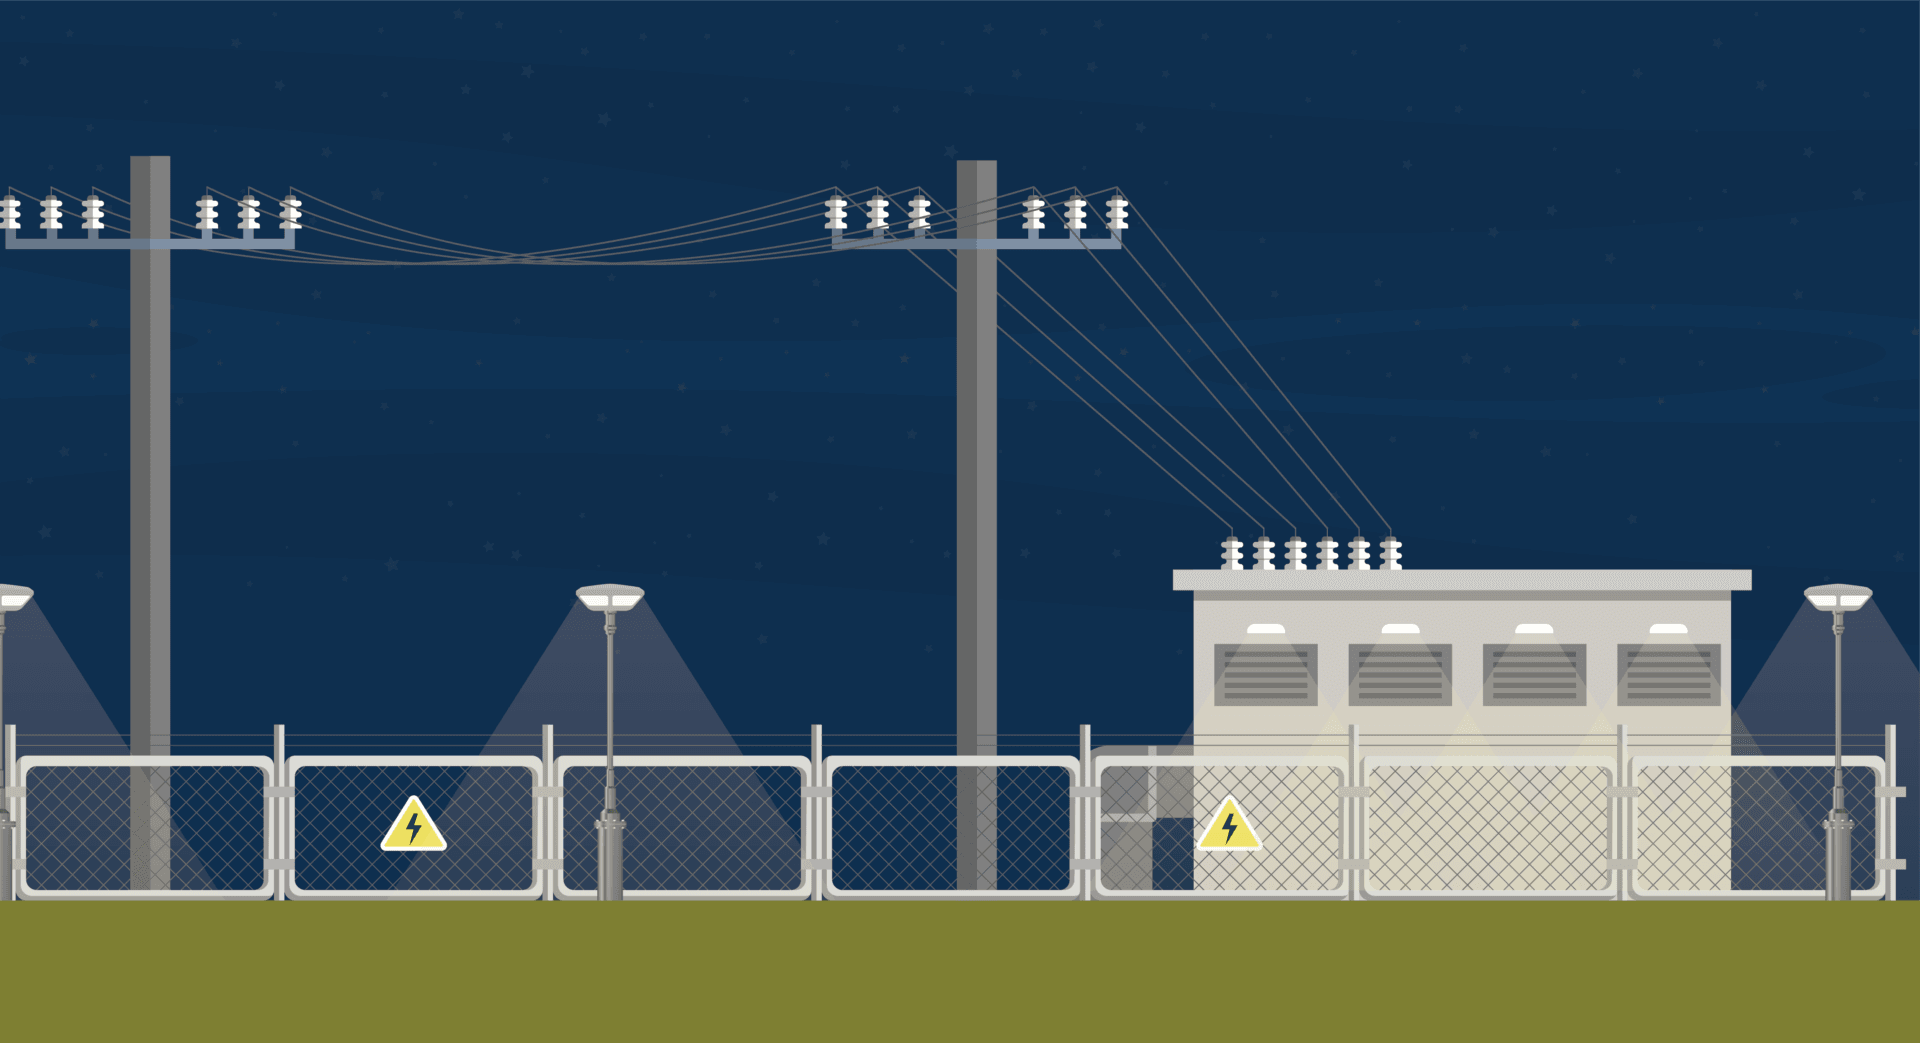 Security Substation infographic